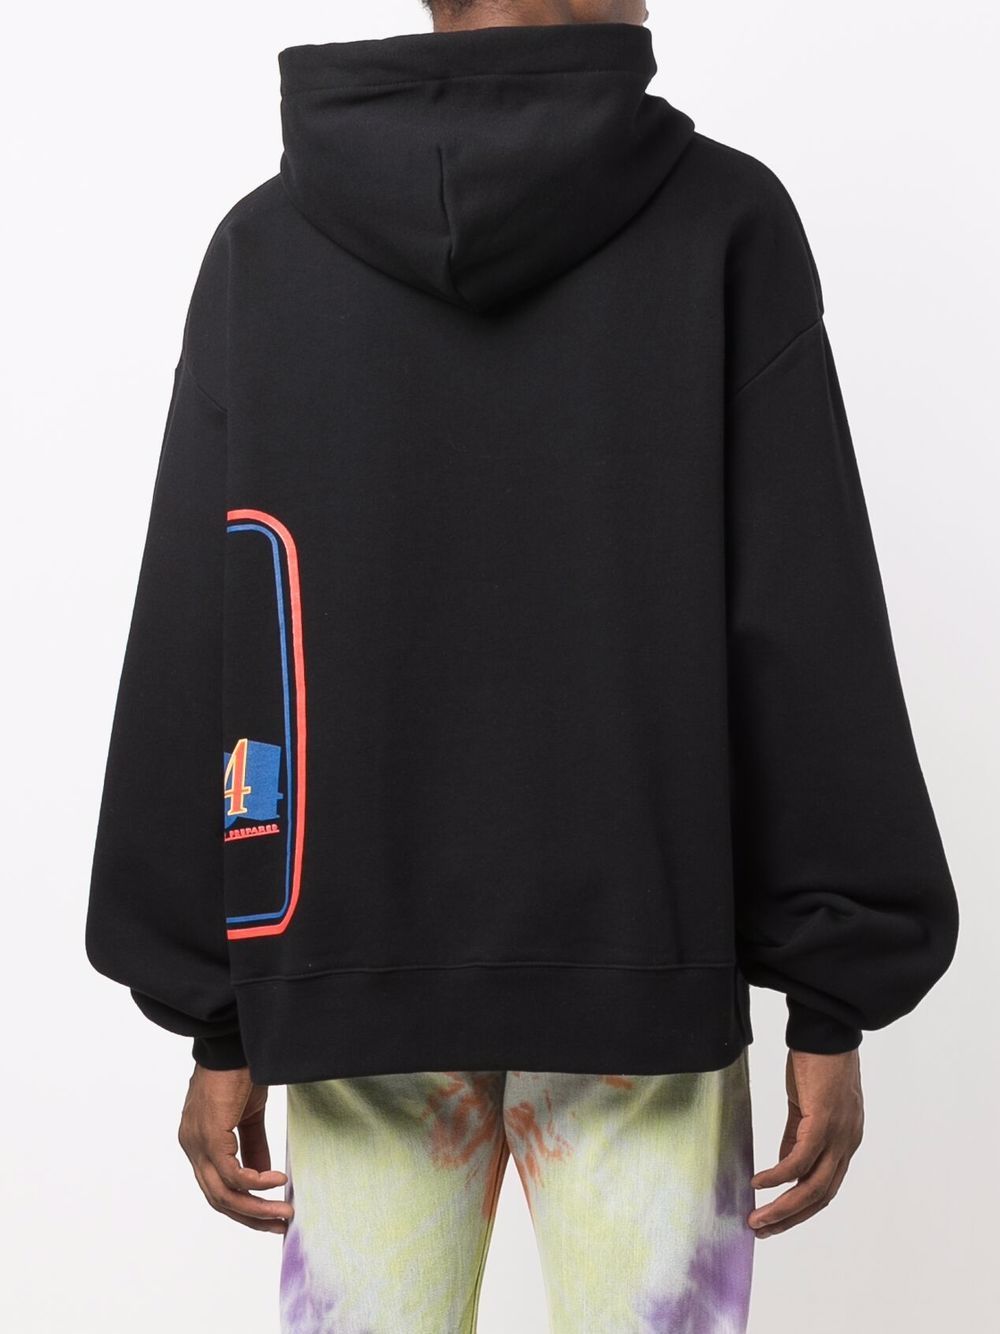 Shop Gcds logo-printed hoodie with Express Delivery - FARFETCH